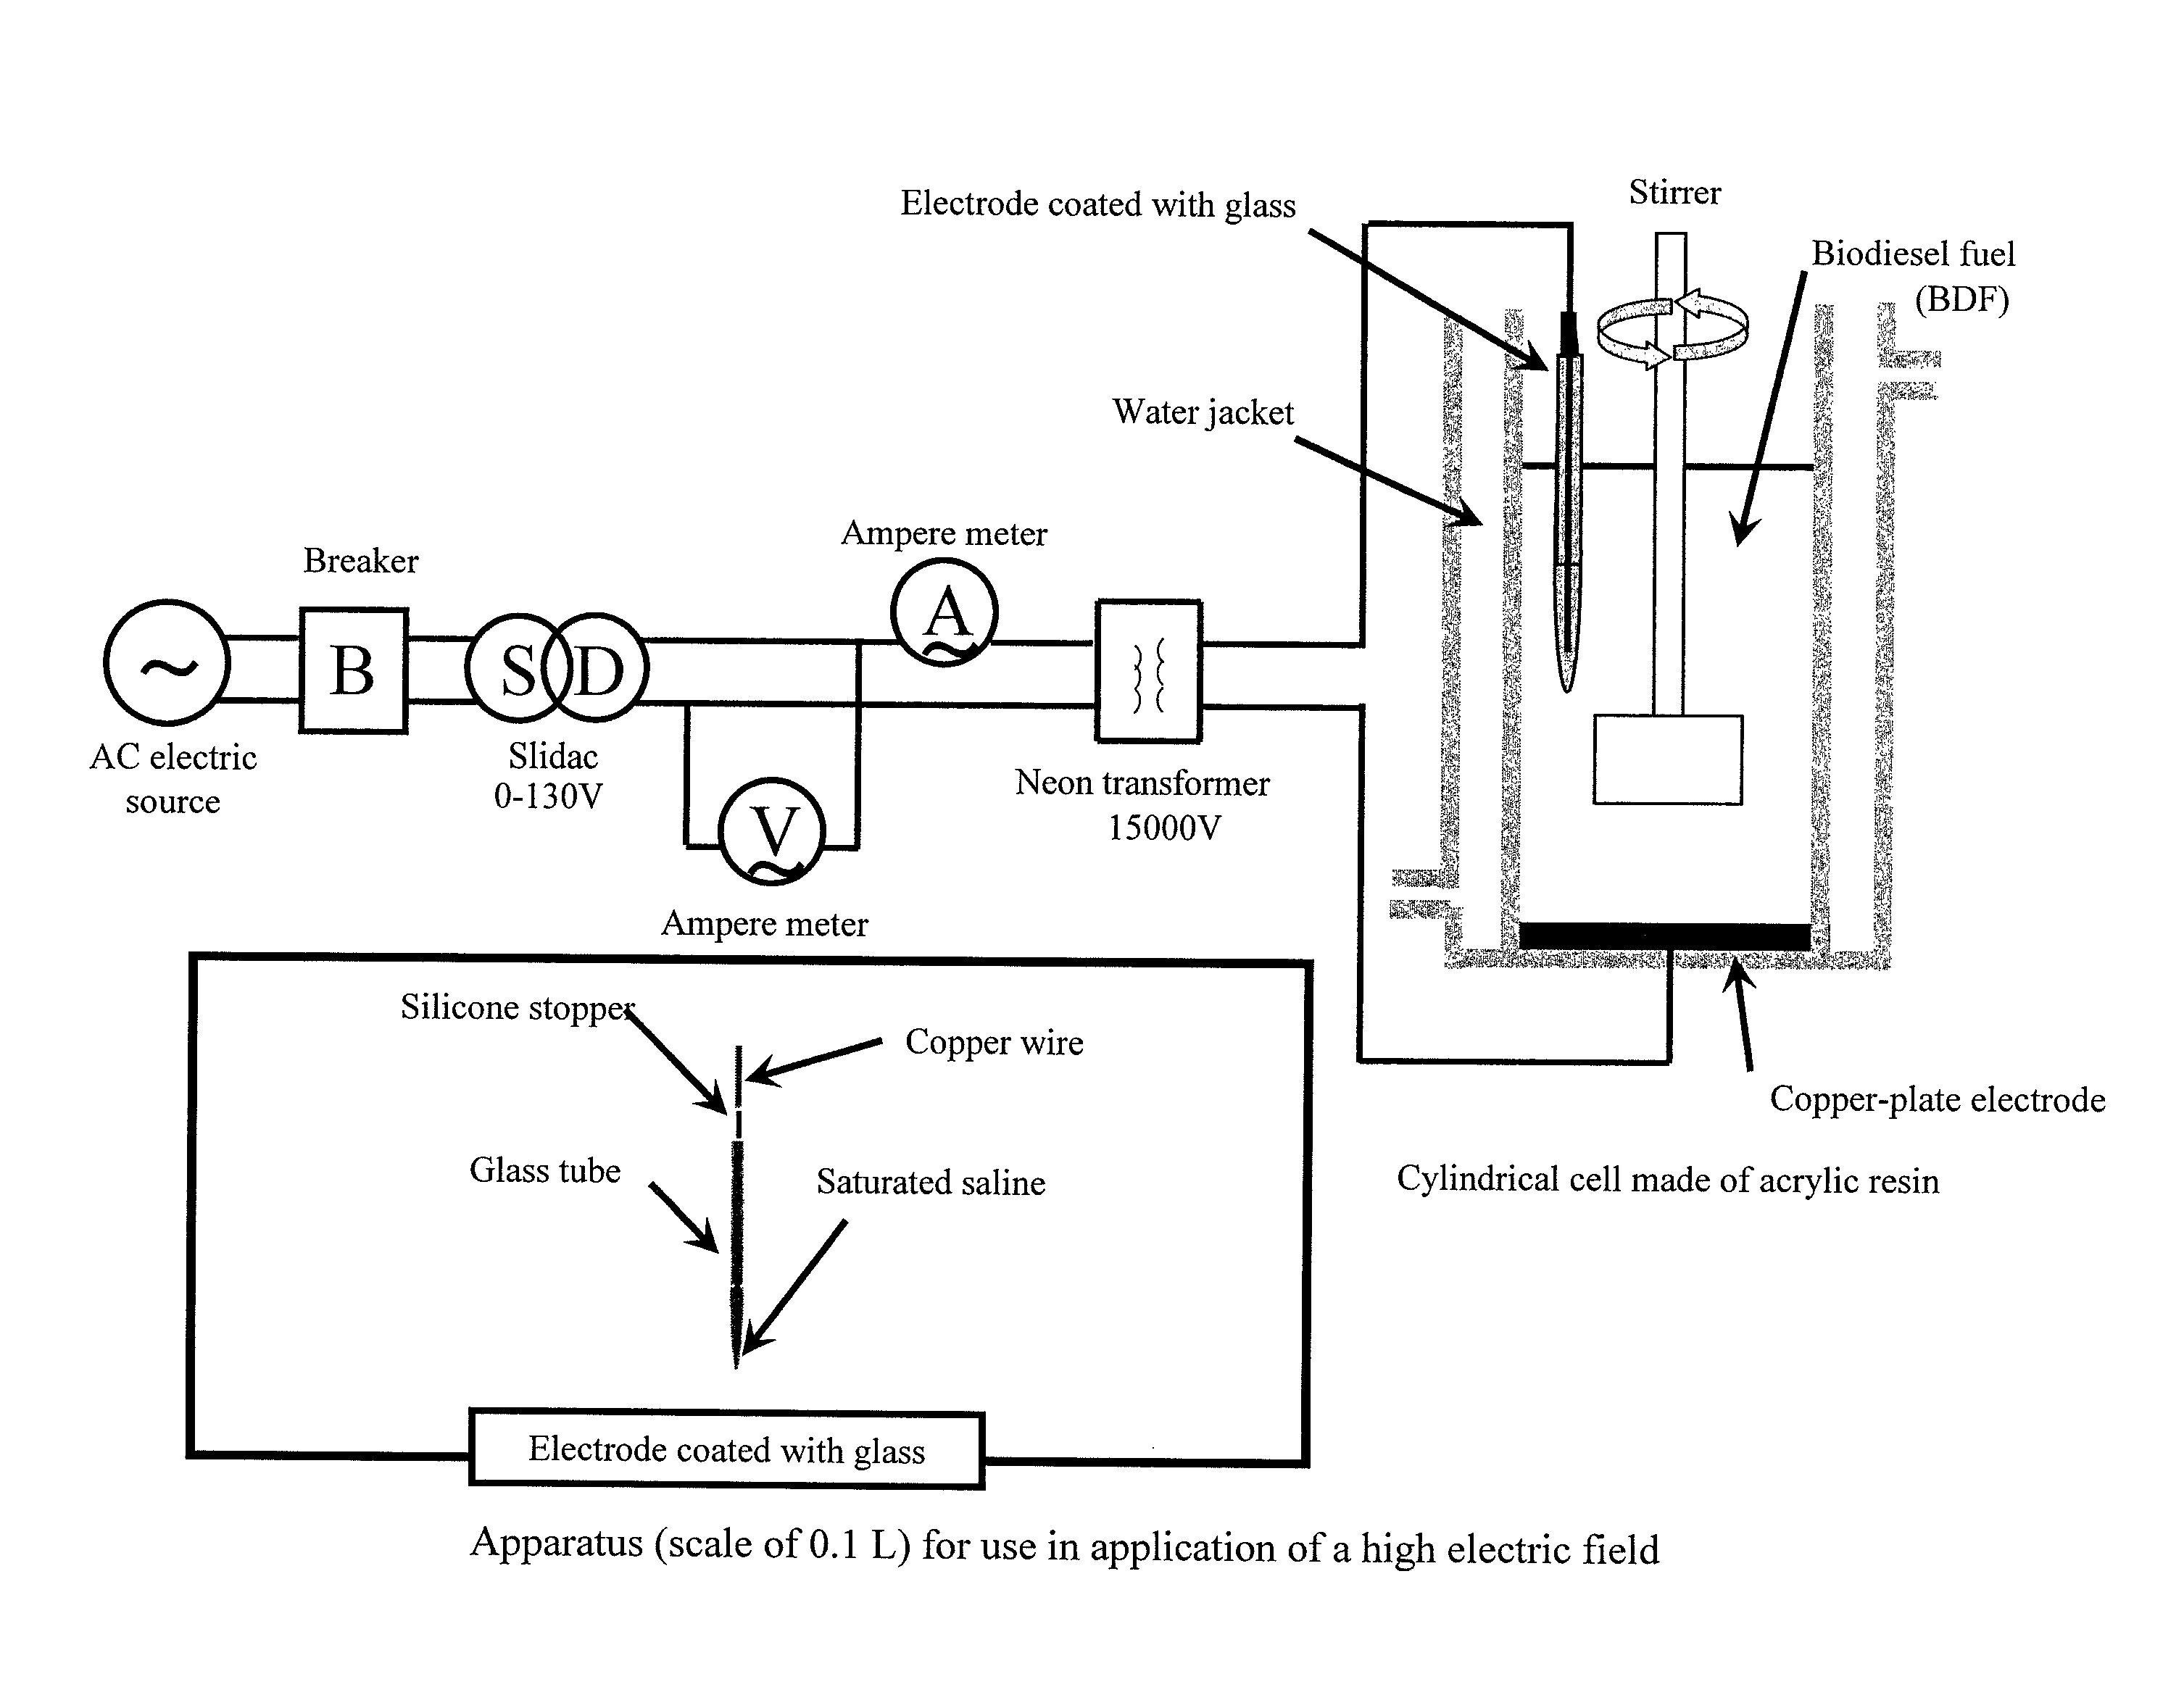 Method for purifying biodiesel fuel